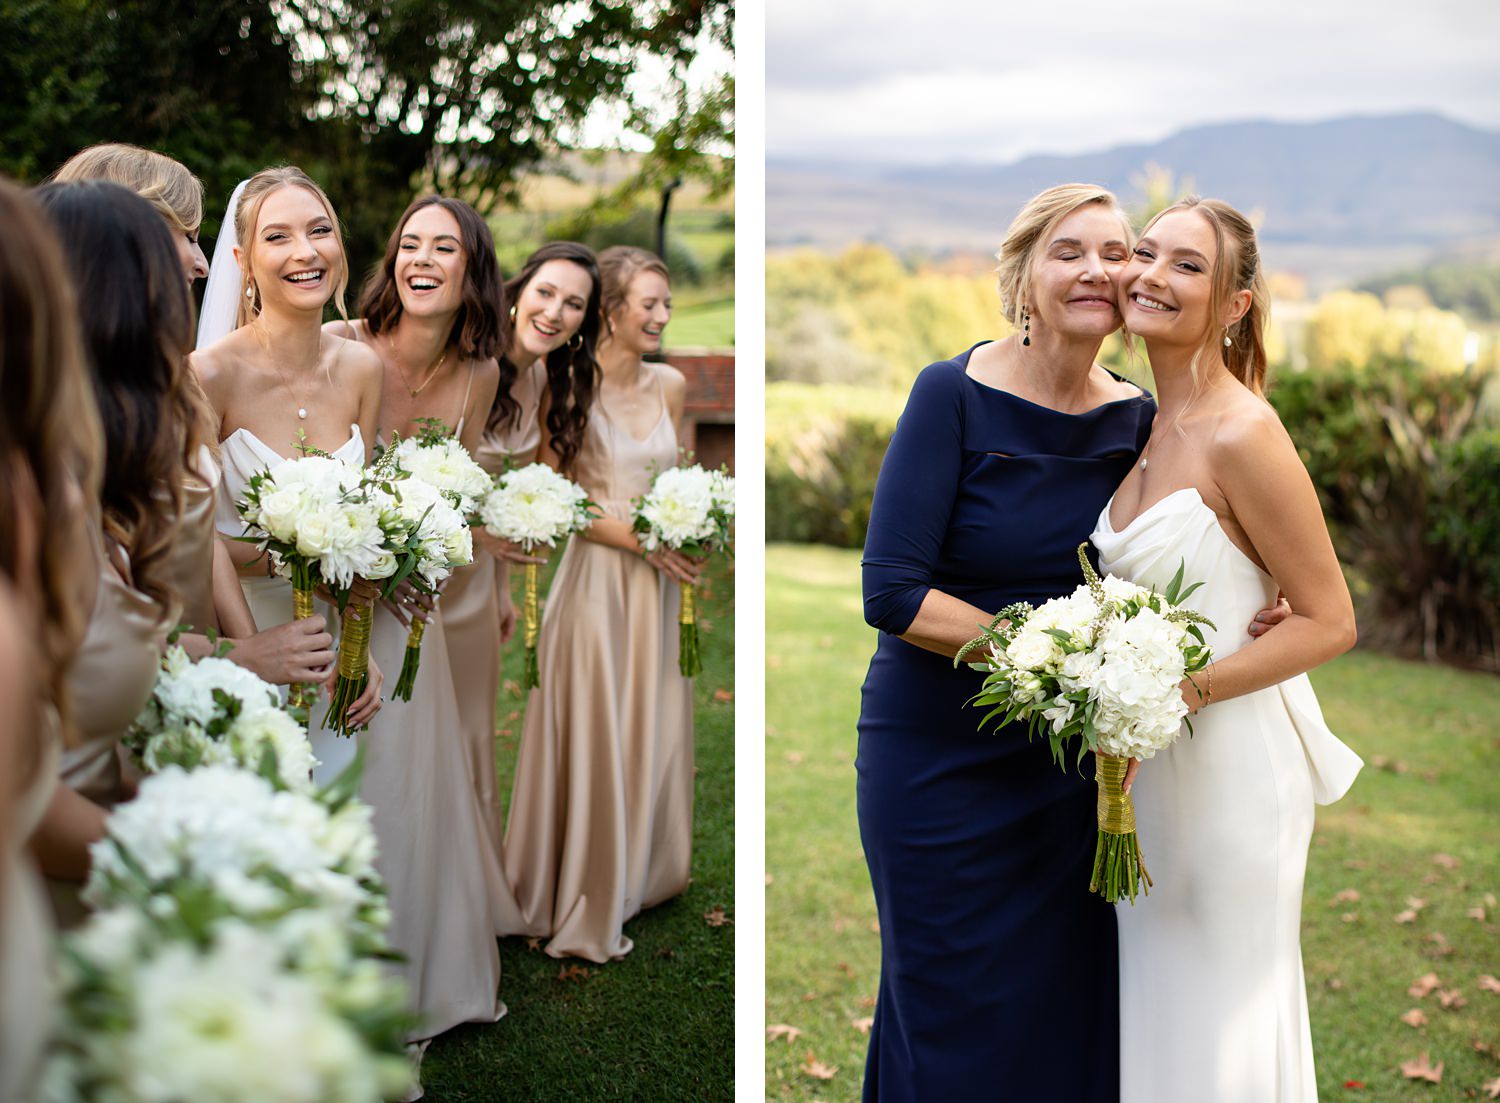 Bridal party and mother of the bride pose for photos at a Central Drakensberg wedding.